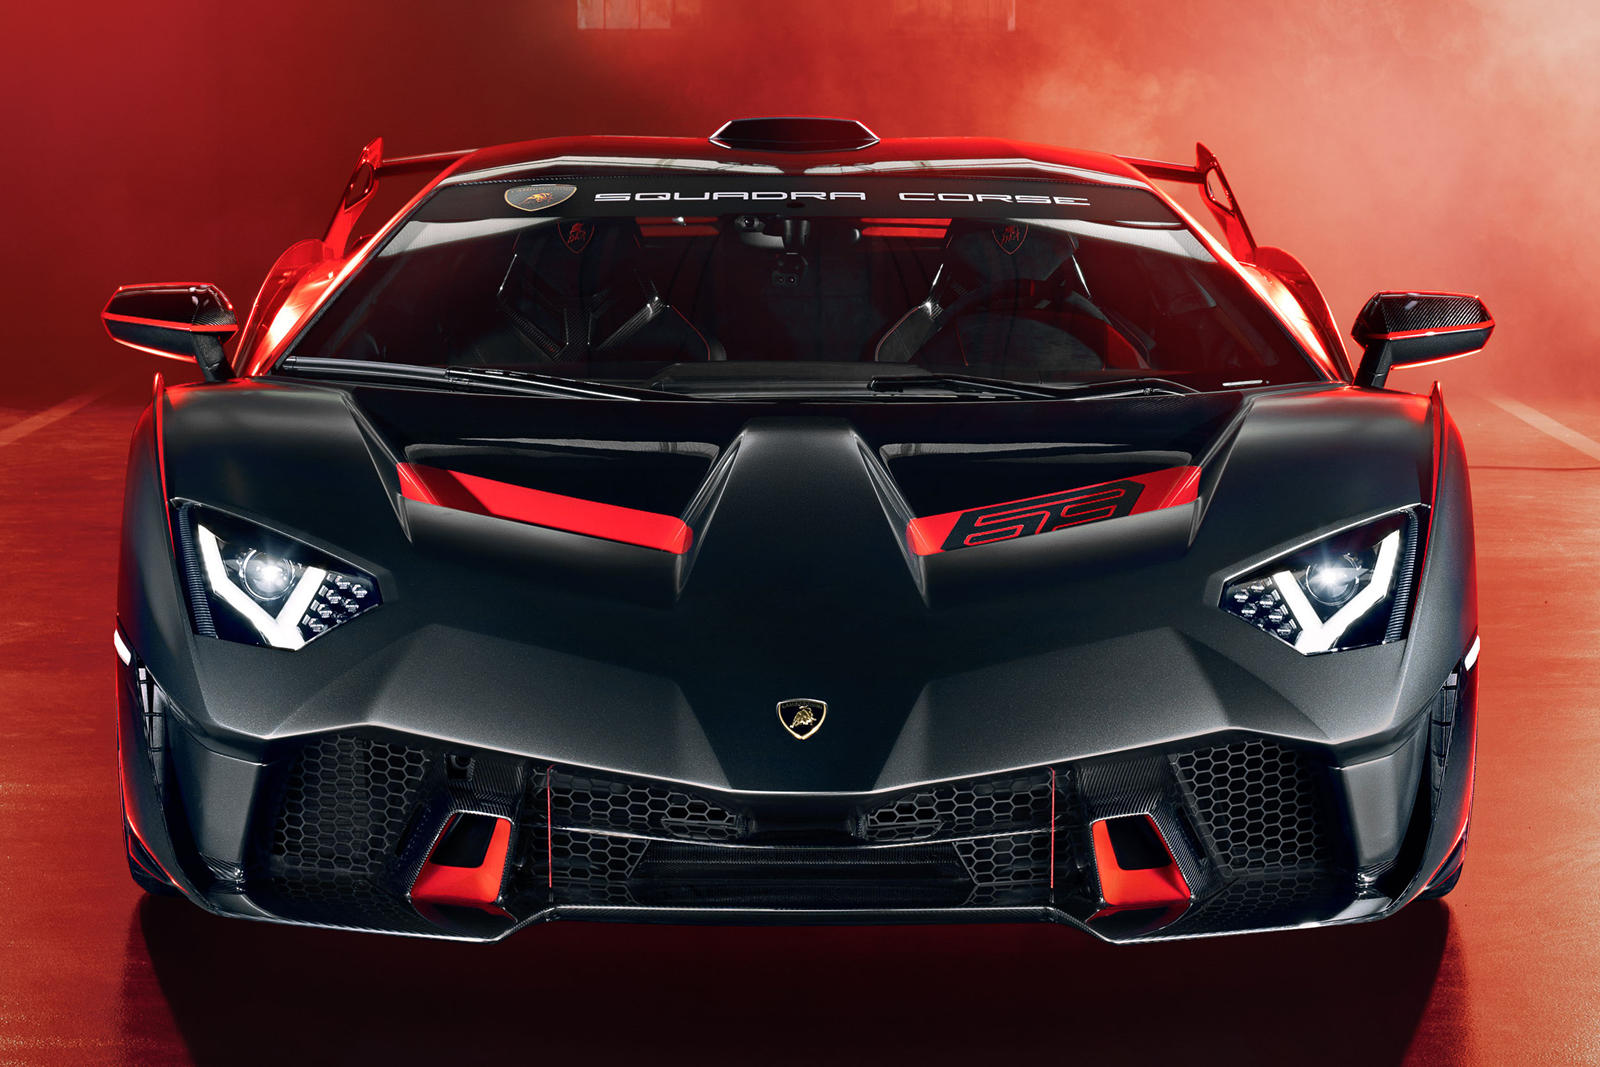 Lamborghini's Track-Only Hypercar Will Break Every Rule | CarBuzz